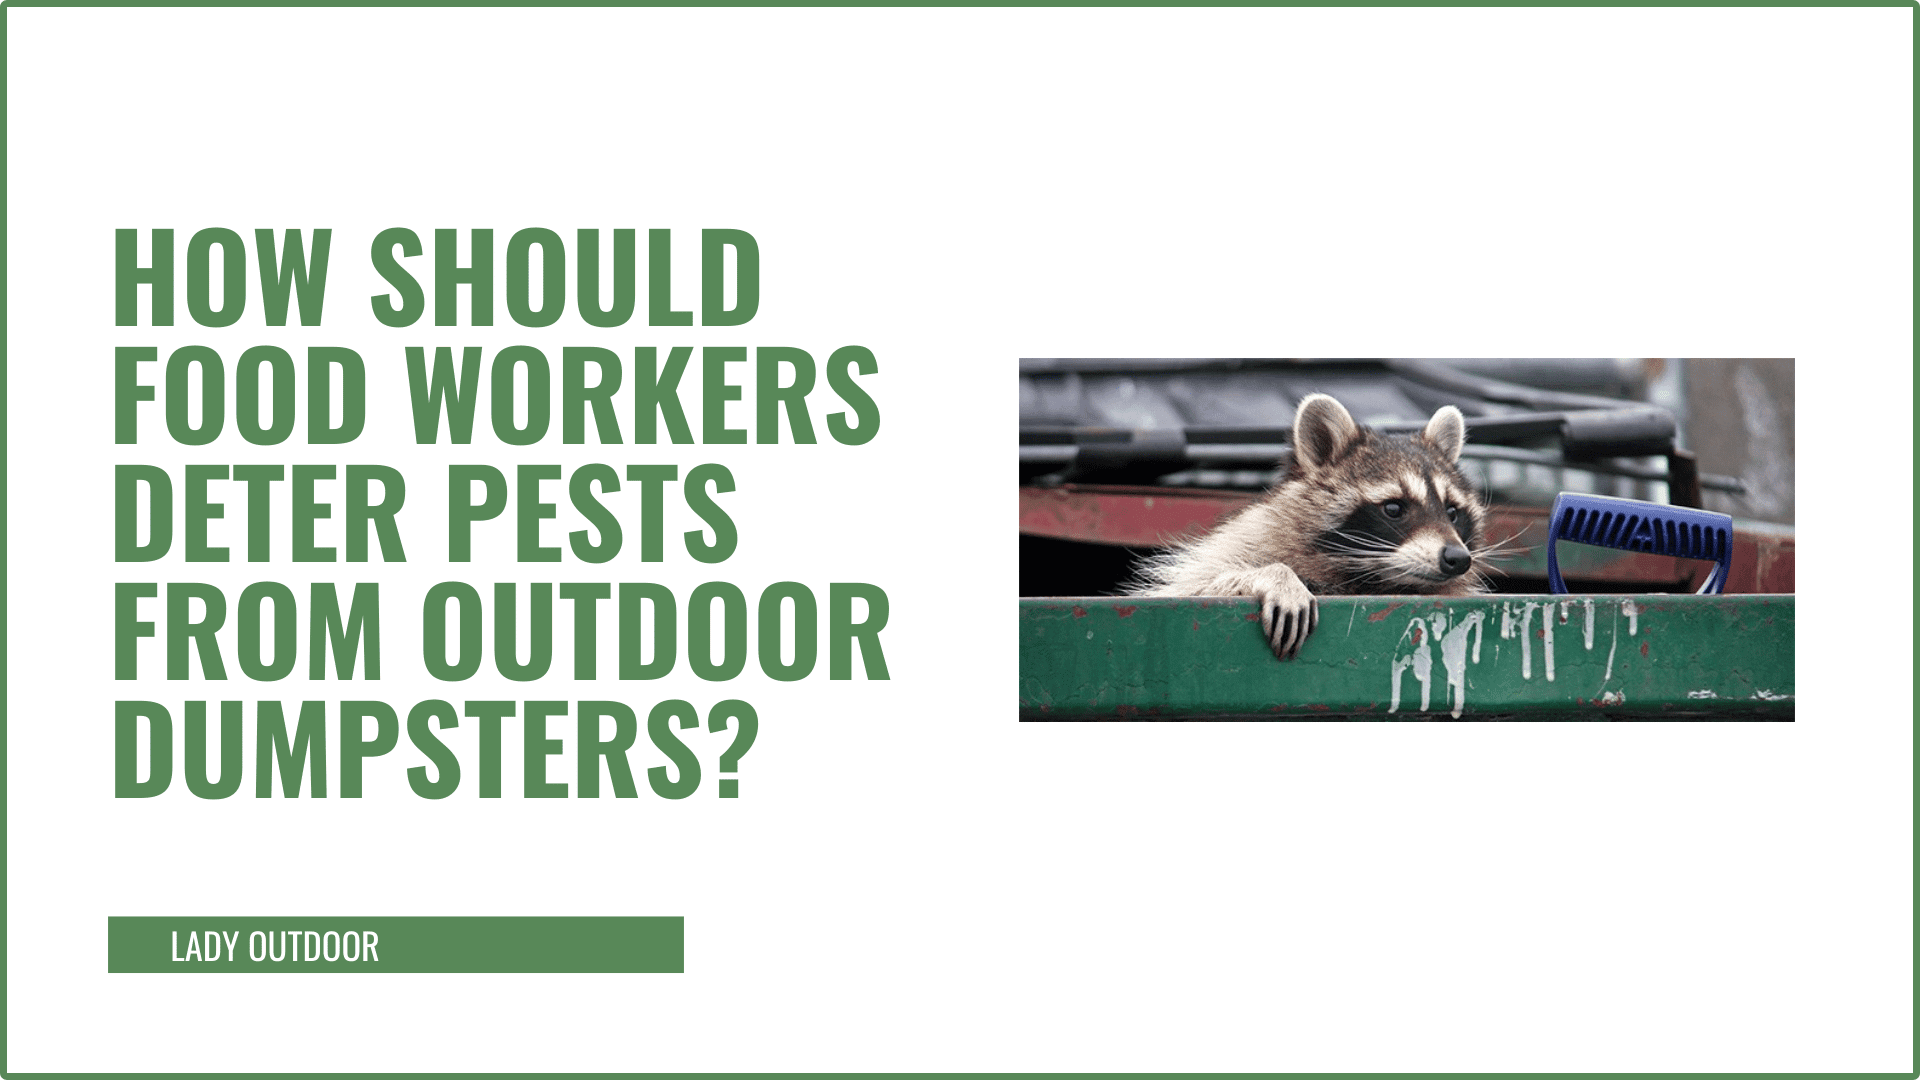 How should food workers deter pests from outdoor dumpsters? in green text on white background